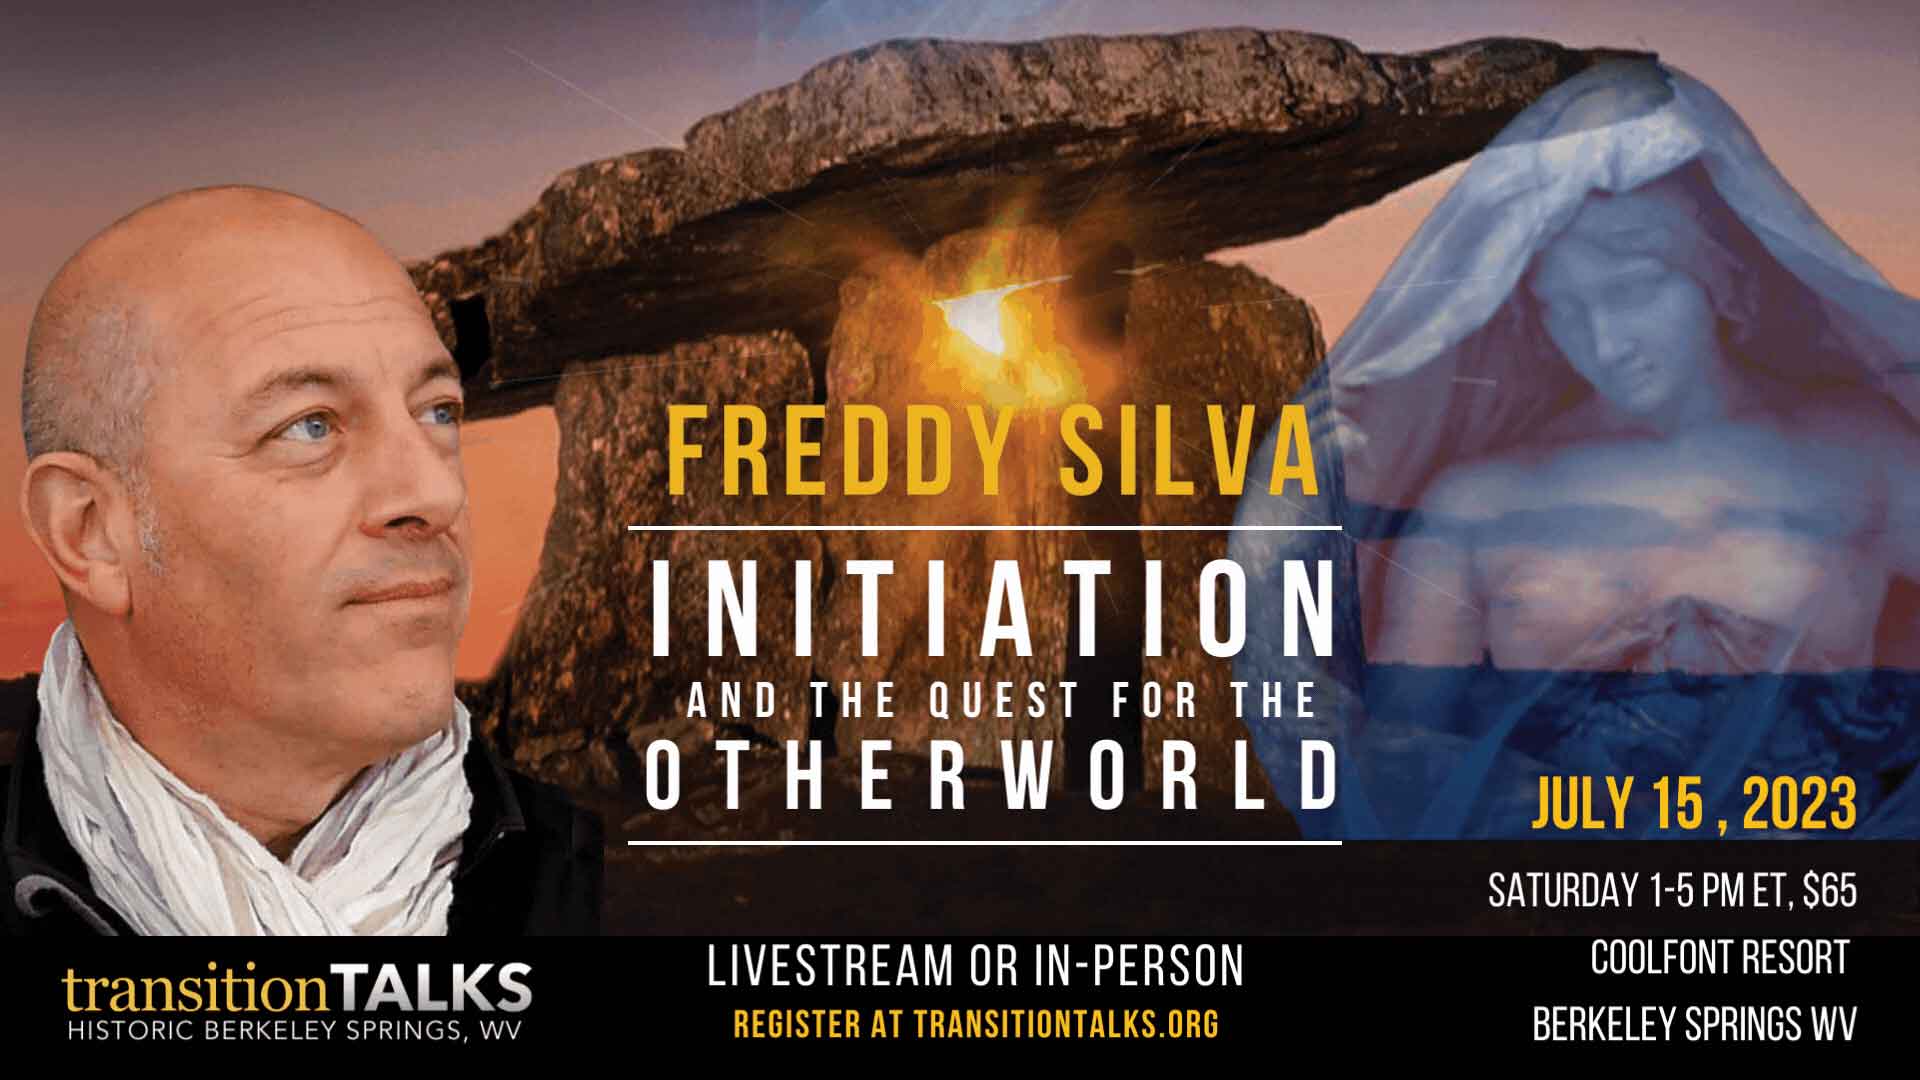 Freddy Silva, TransitionTalks, July 15, 2023. Initiation and the Quest for the Otherworld.